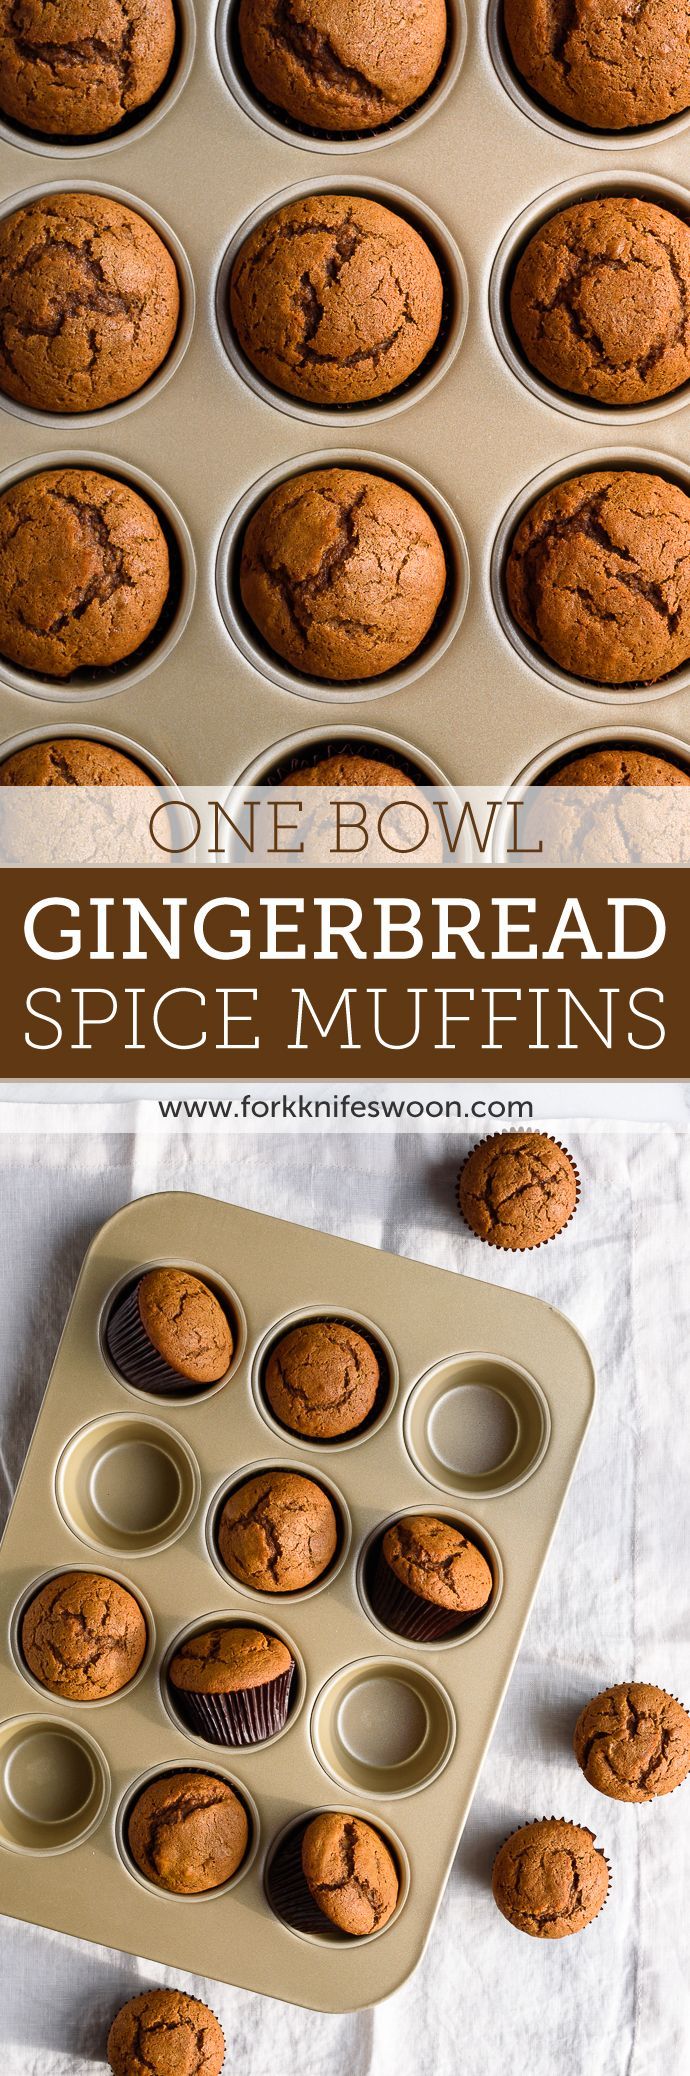 One Bowl Gingerbread Muffins | Fork Knife Swoon @Laura // Fork Knife Swoon